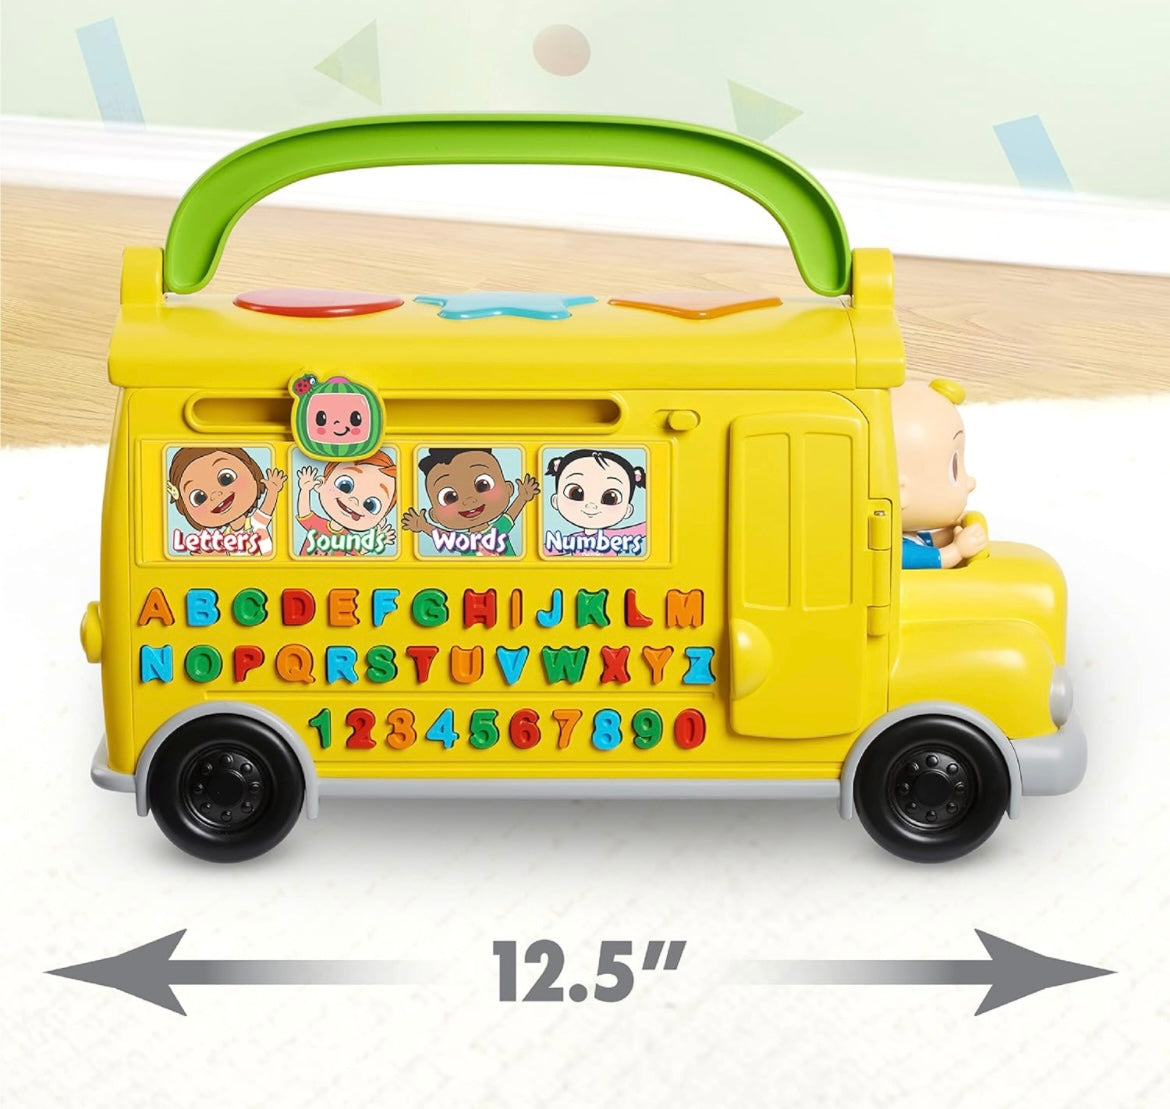 Cocomelon Musical Learning Bus